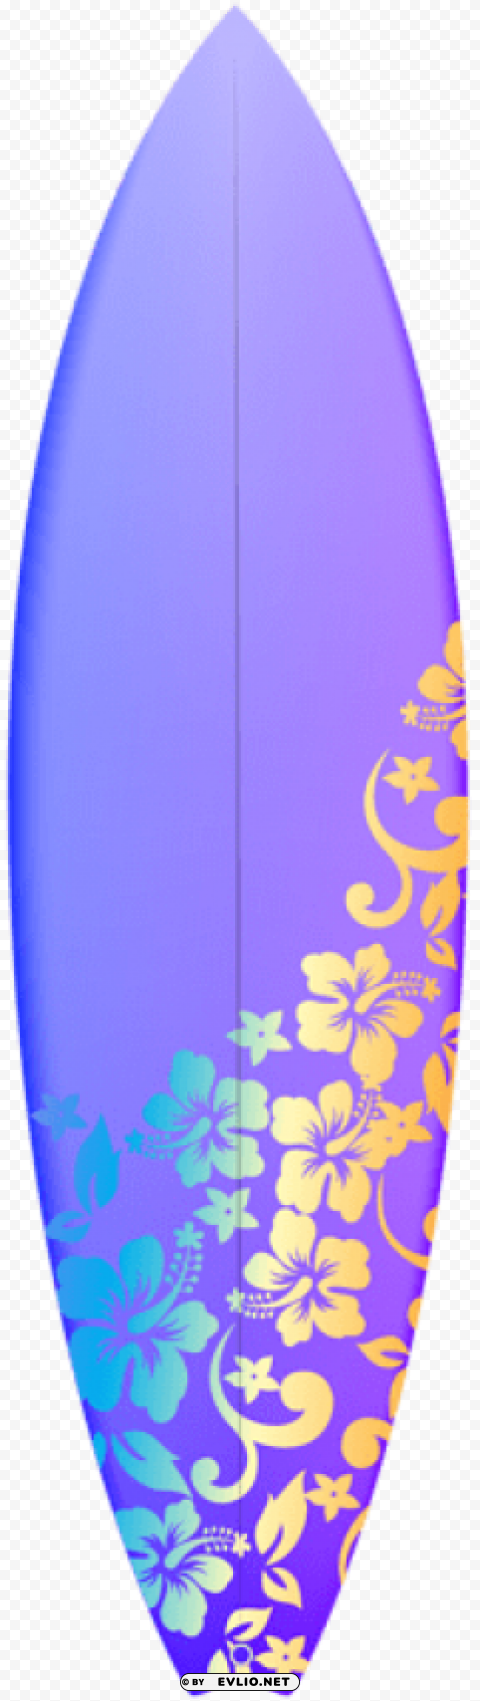 Surfboard Transparent PNG Image Isolated With HighQuality Clarity